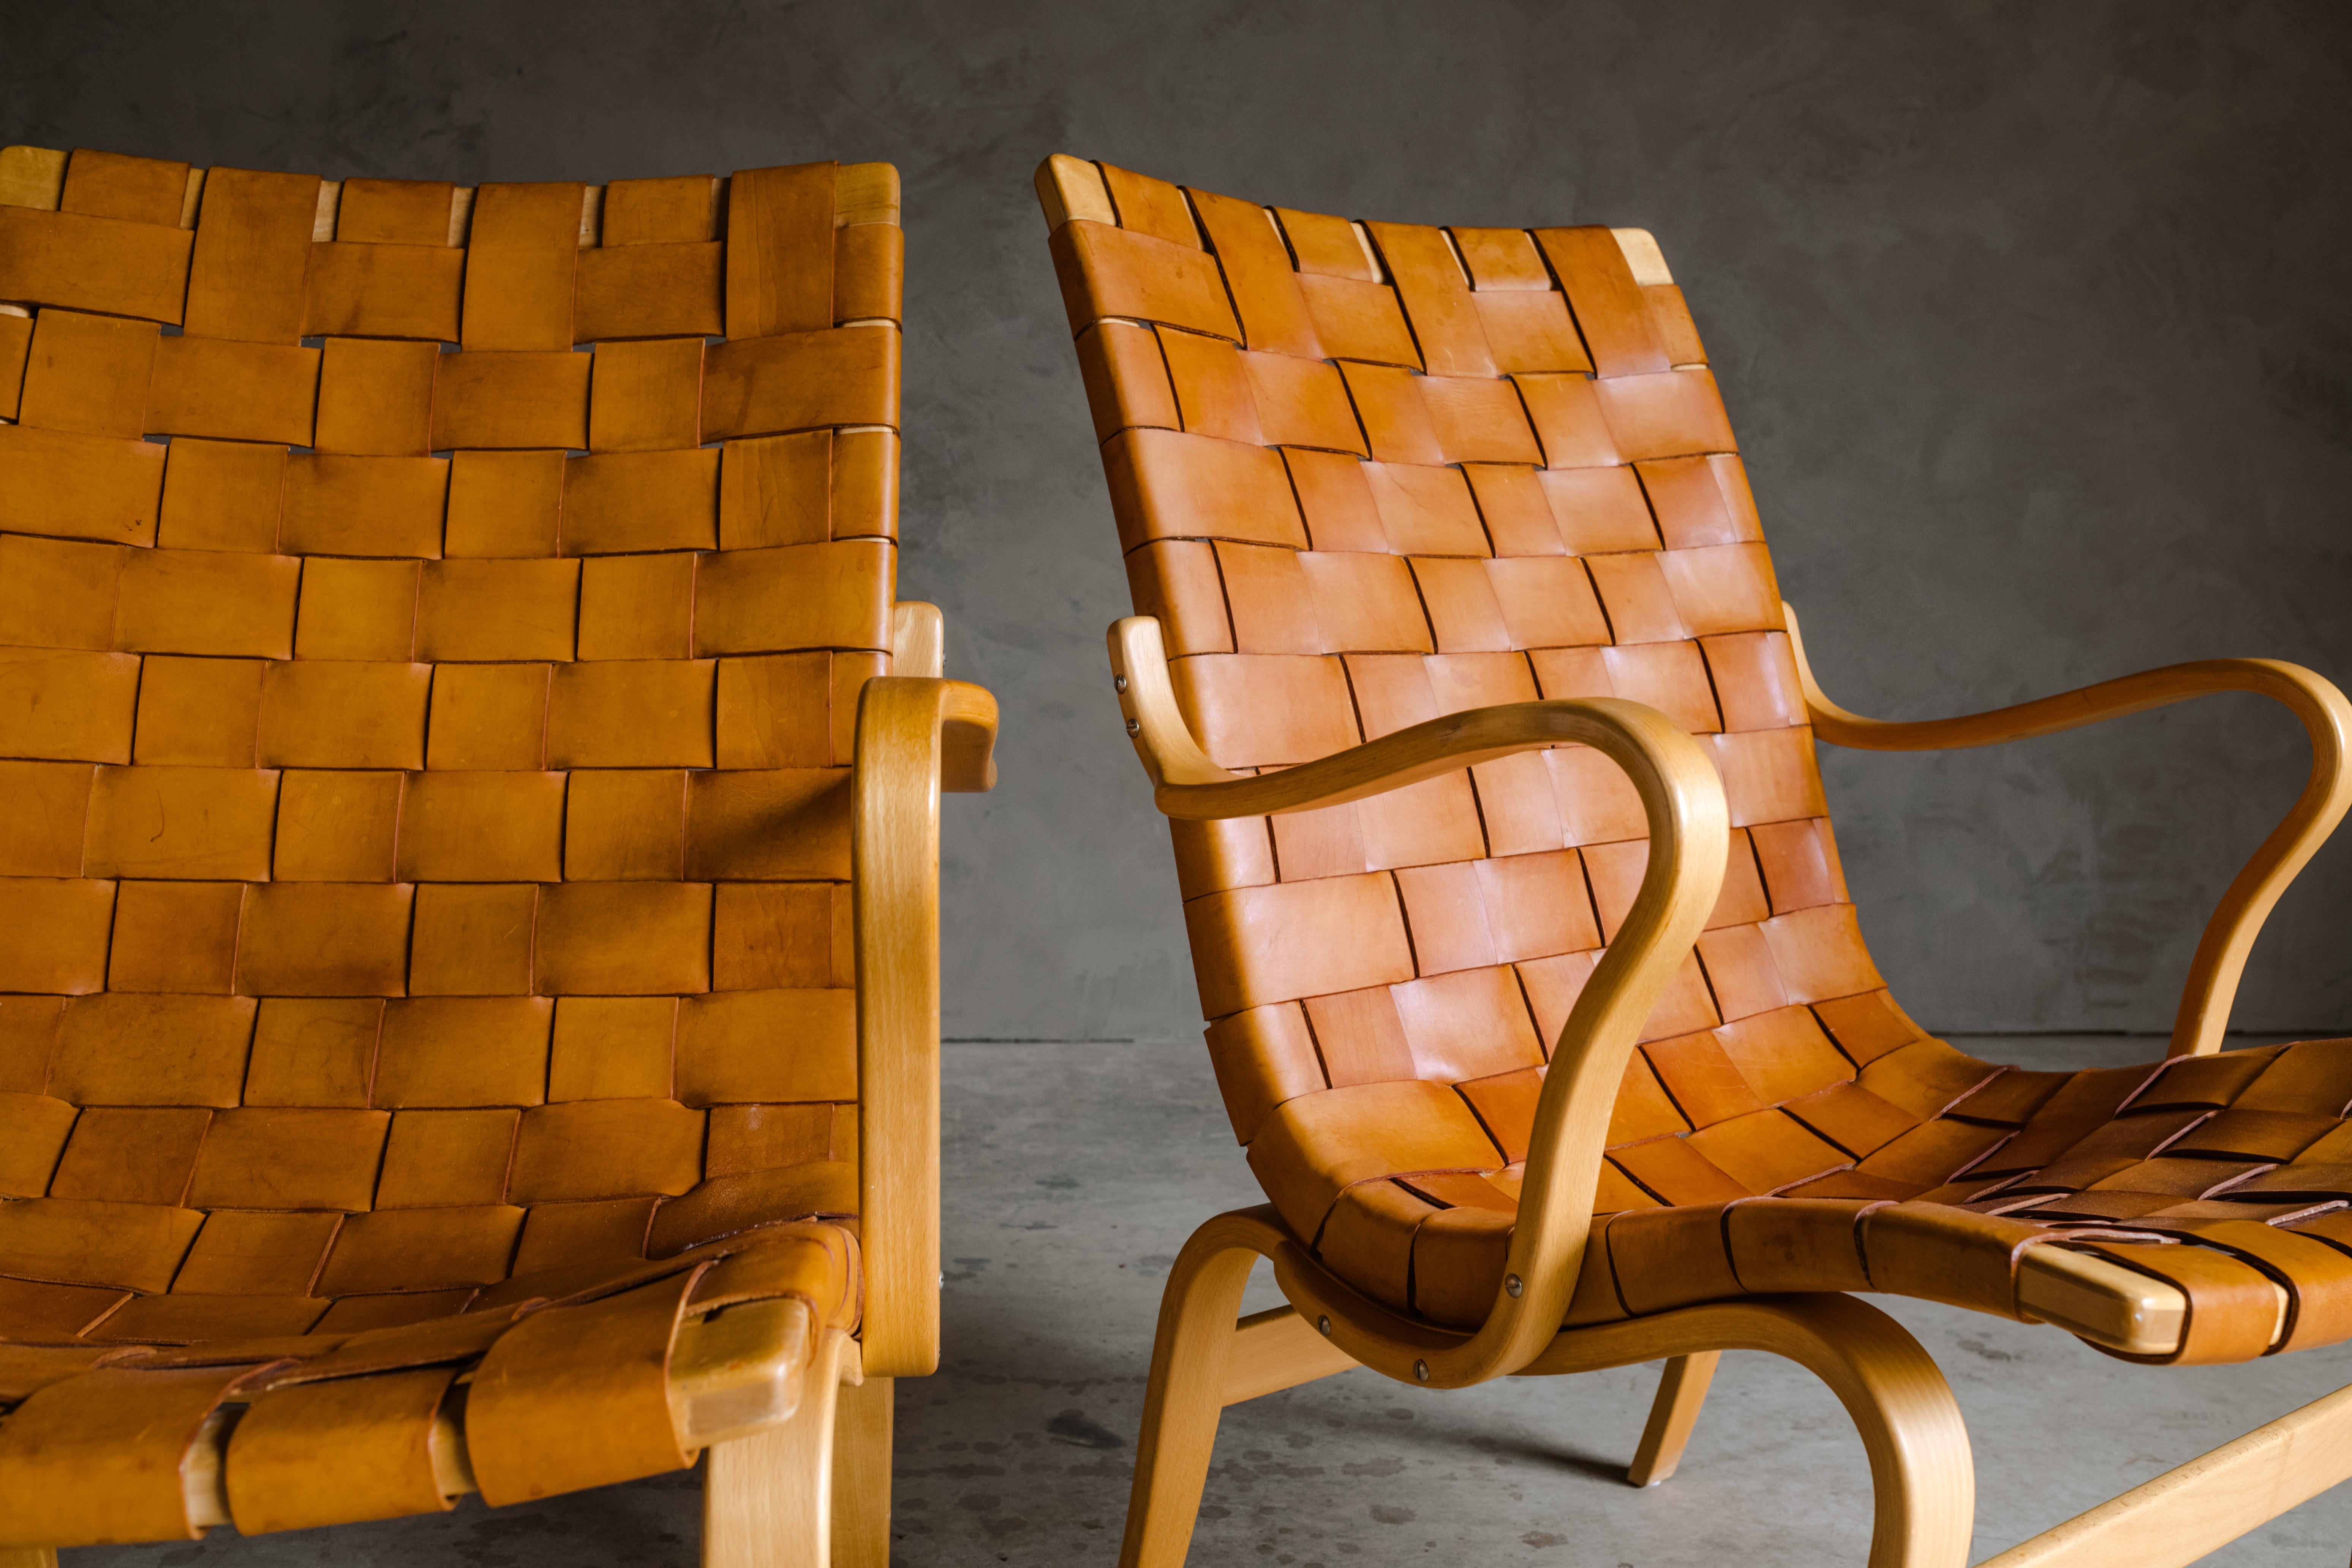 Vintage pair of Bruno Mathsson lounge chairs, model Eva, Sweden 1960s. Original woven leather upholstery on a bentwood frame. Stamped Bruno Mathsson on the back.